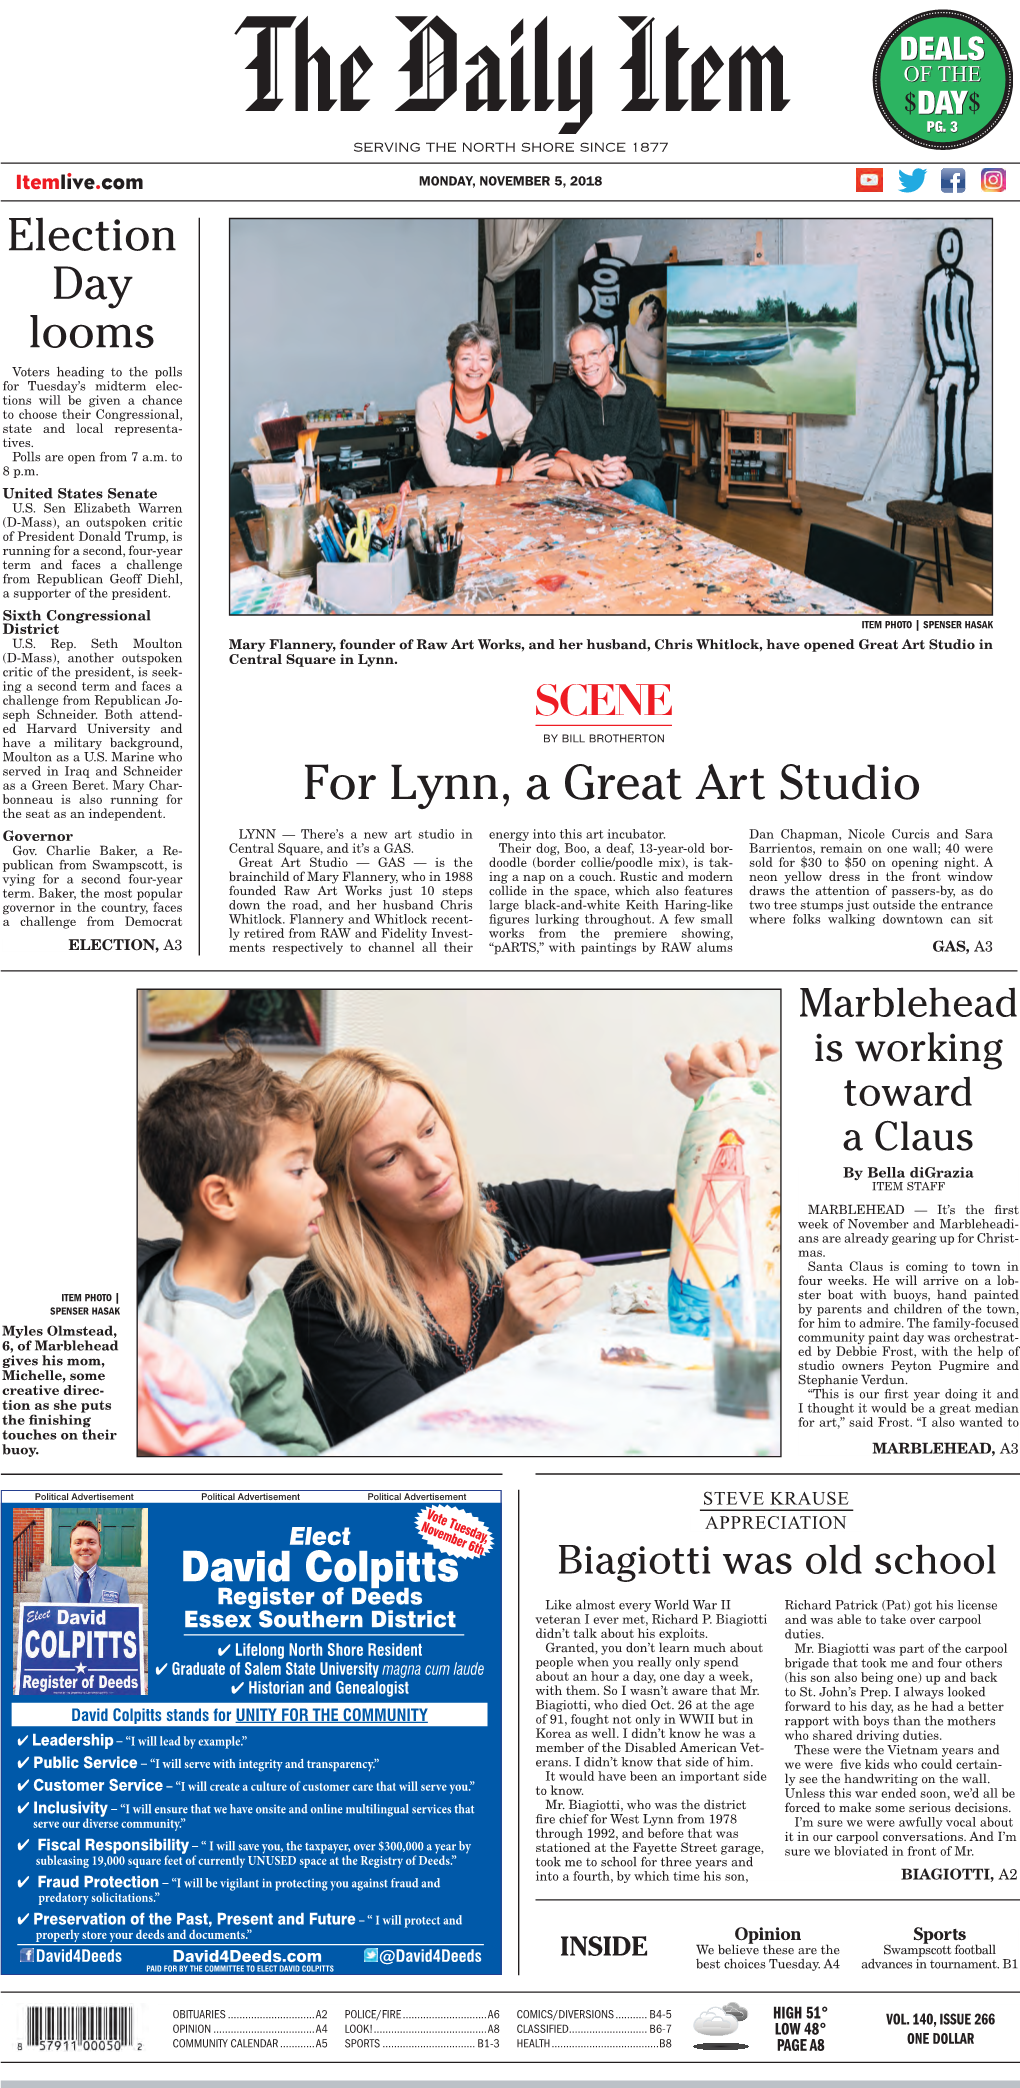 For Lynn, a Great Art Studio the Seat As an Independent